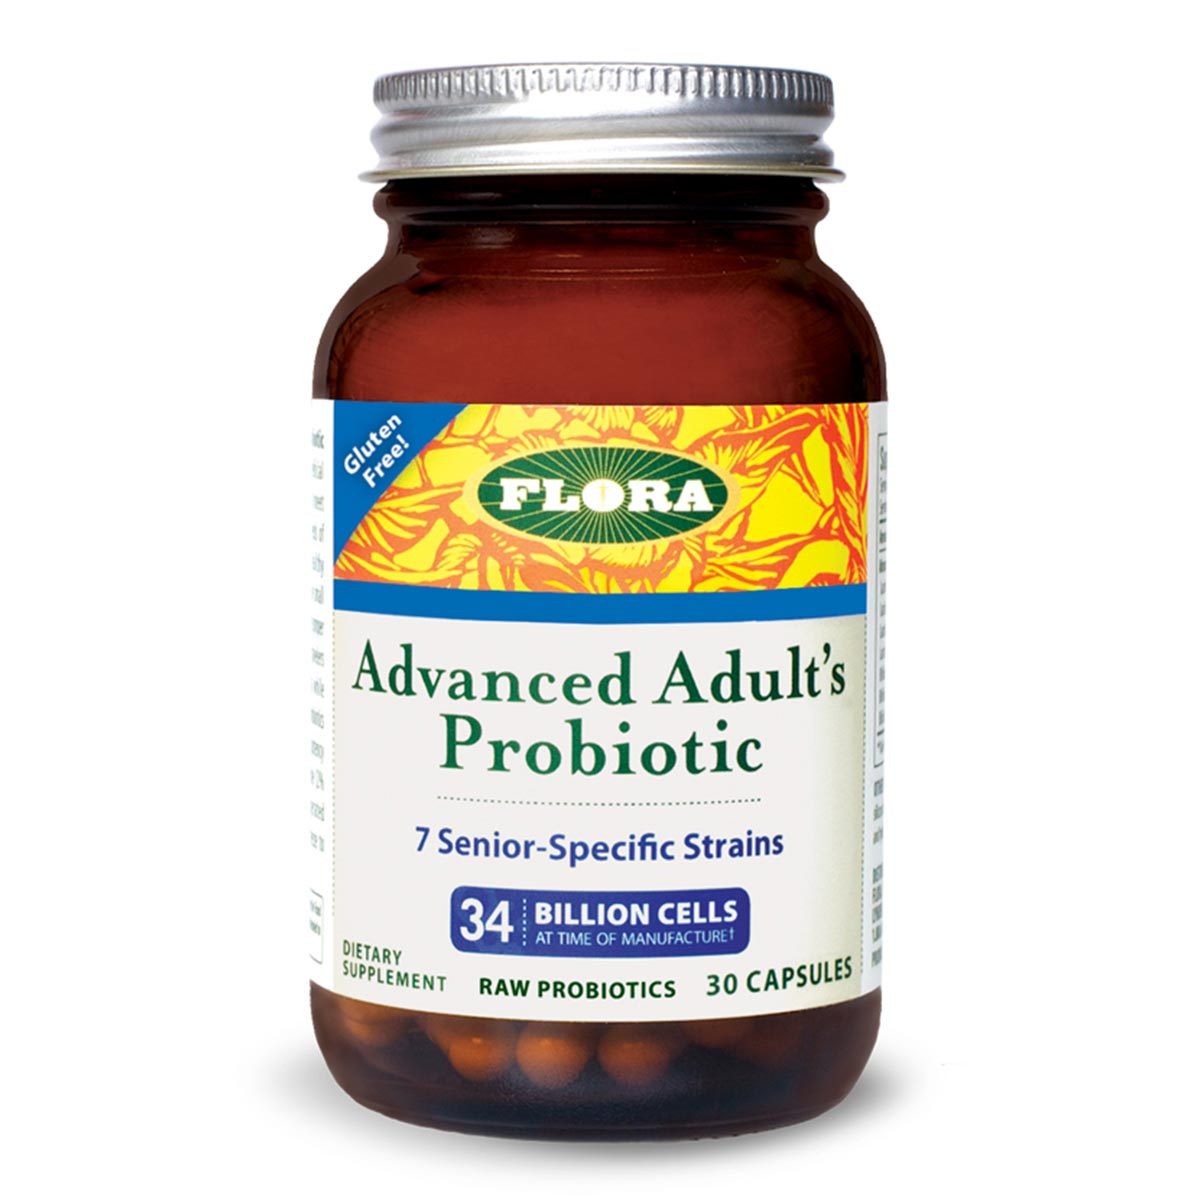 Primary image of Advanced Adult Probiotic